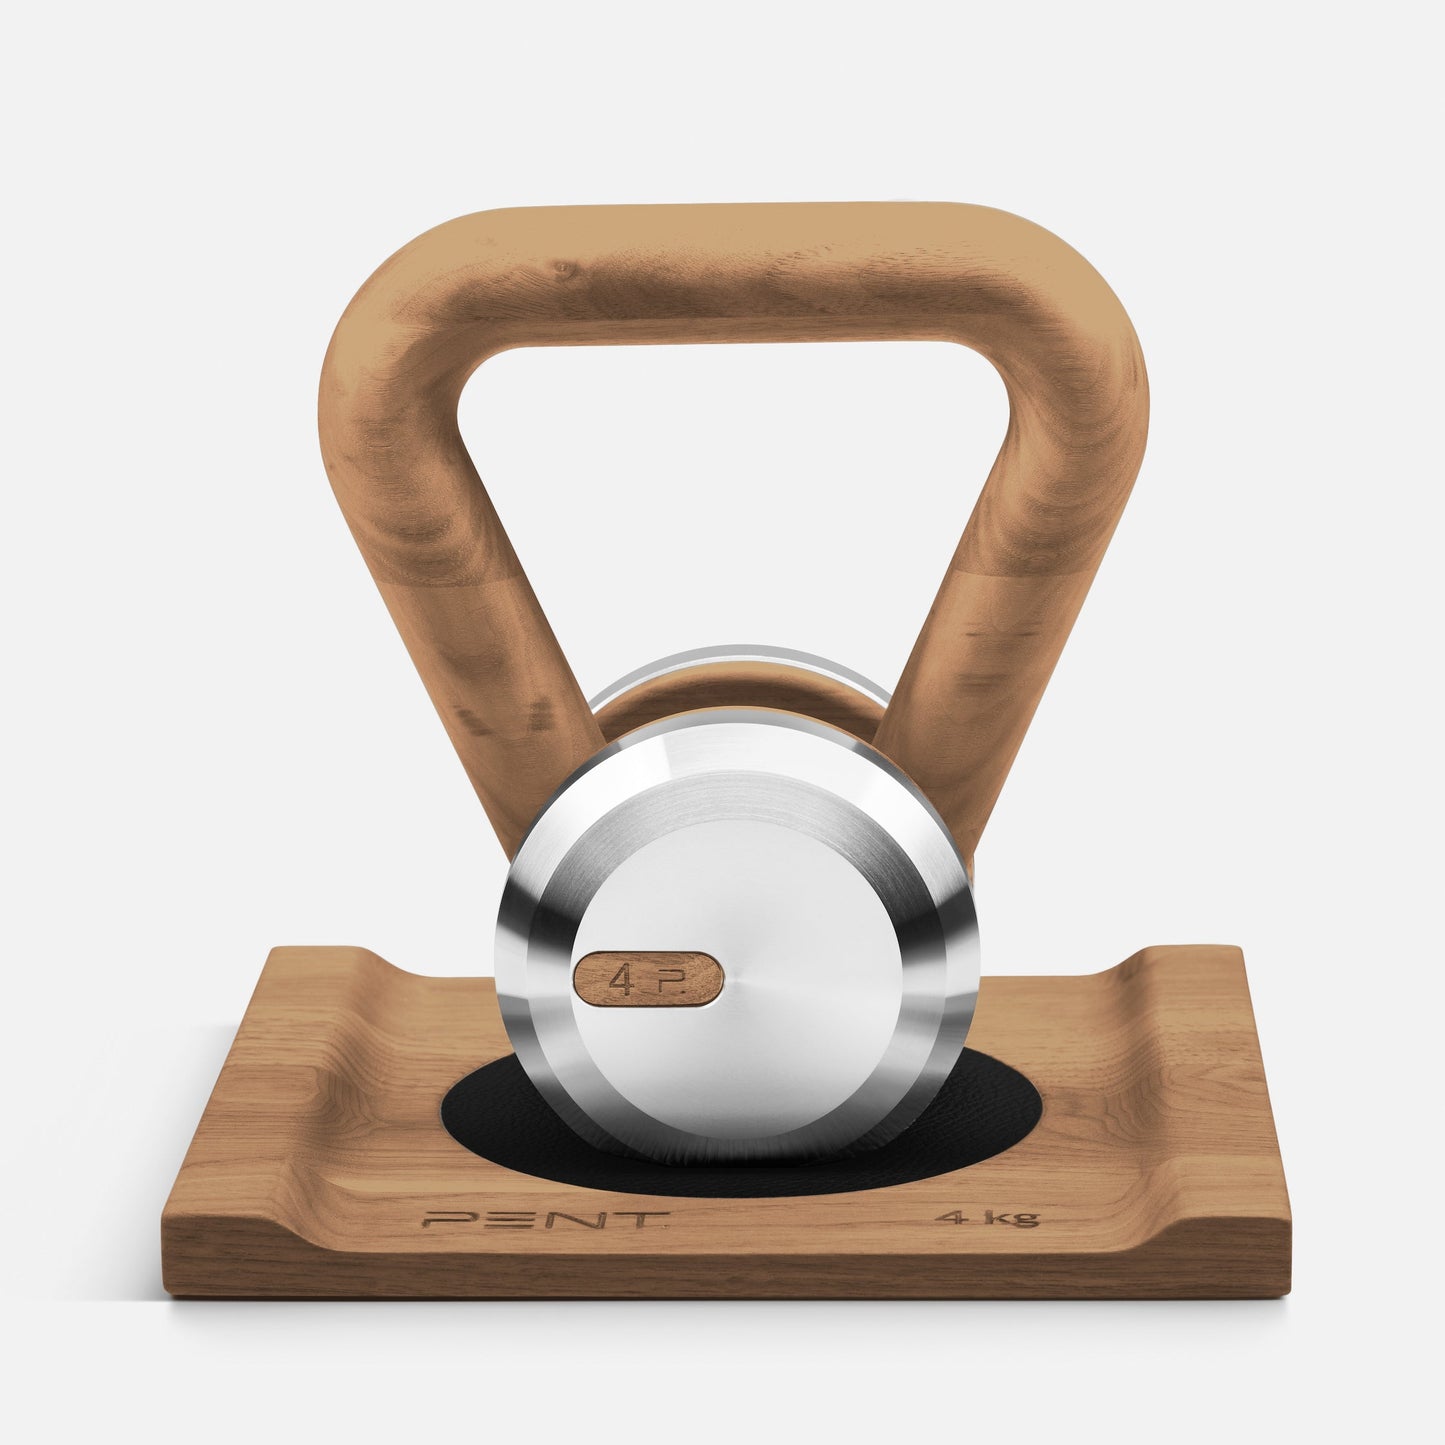 PENT x Cycling Bears LOVA - Luxury Kettlebell with wooden stand